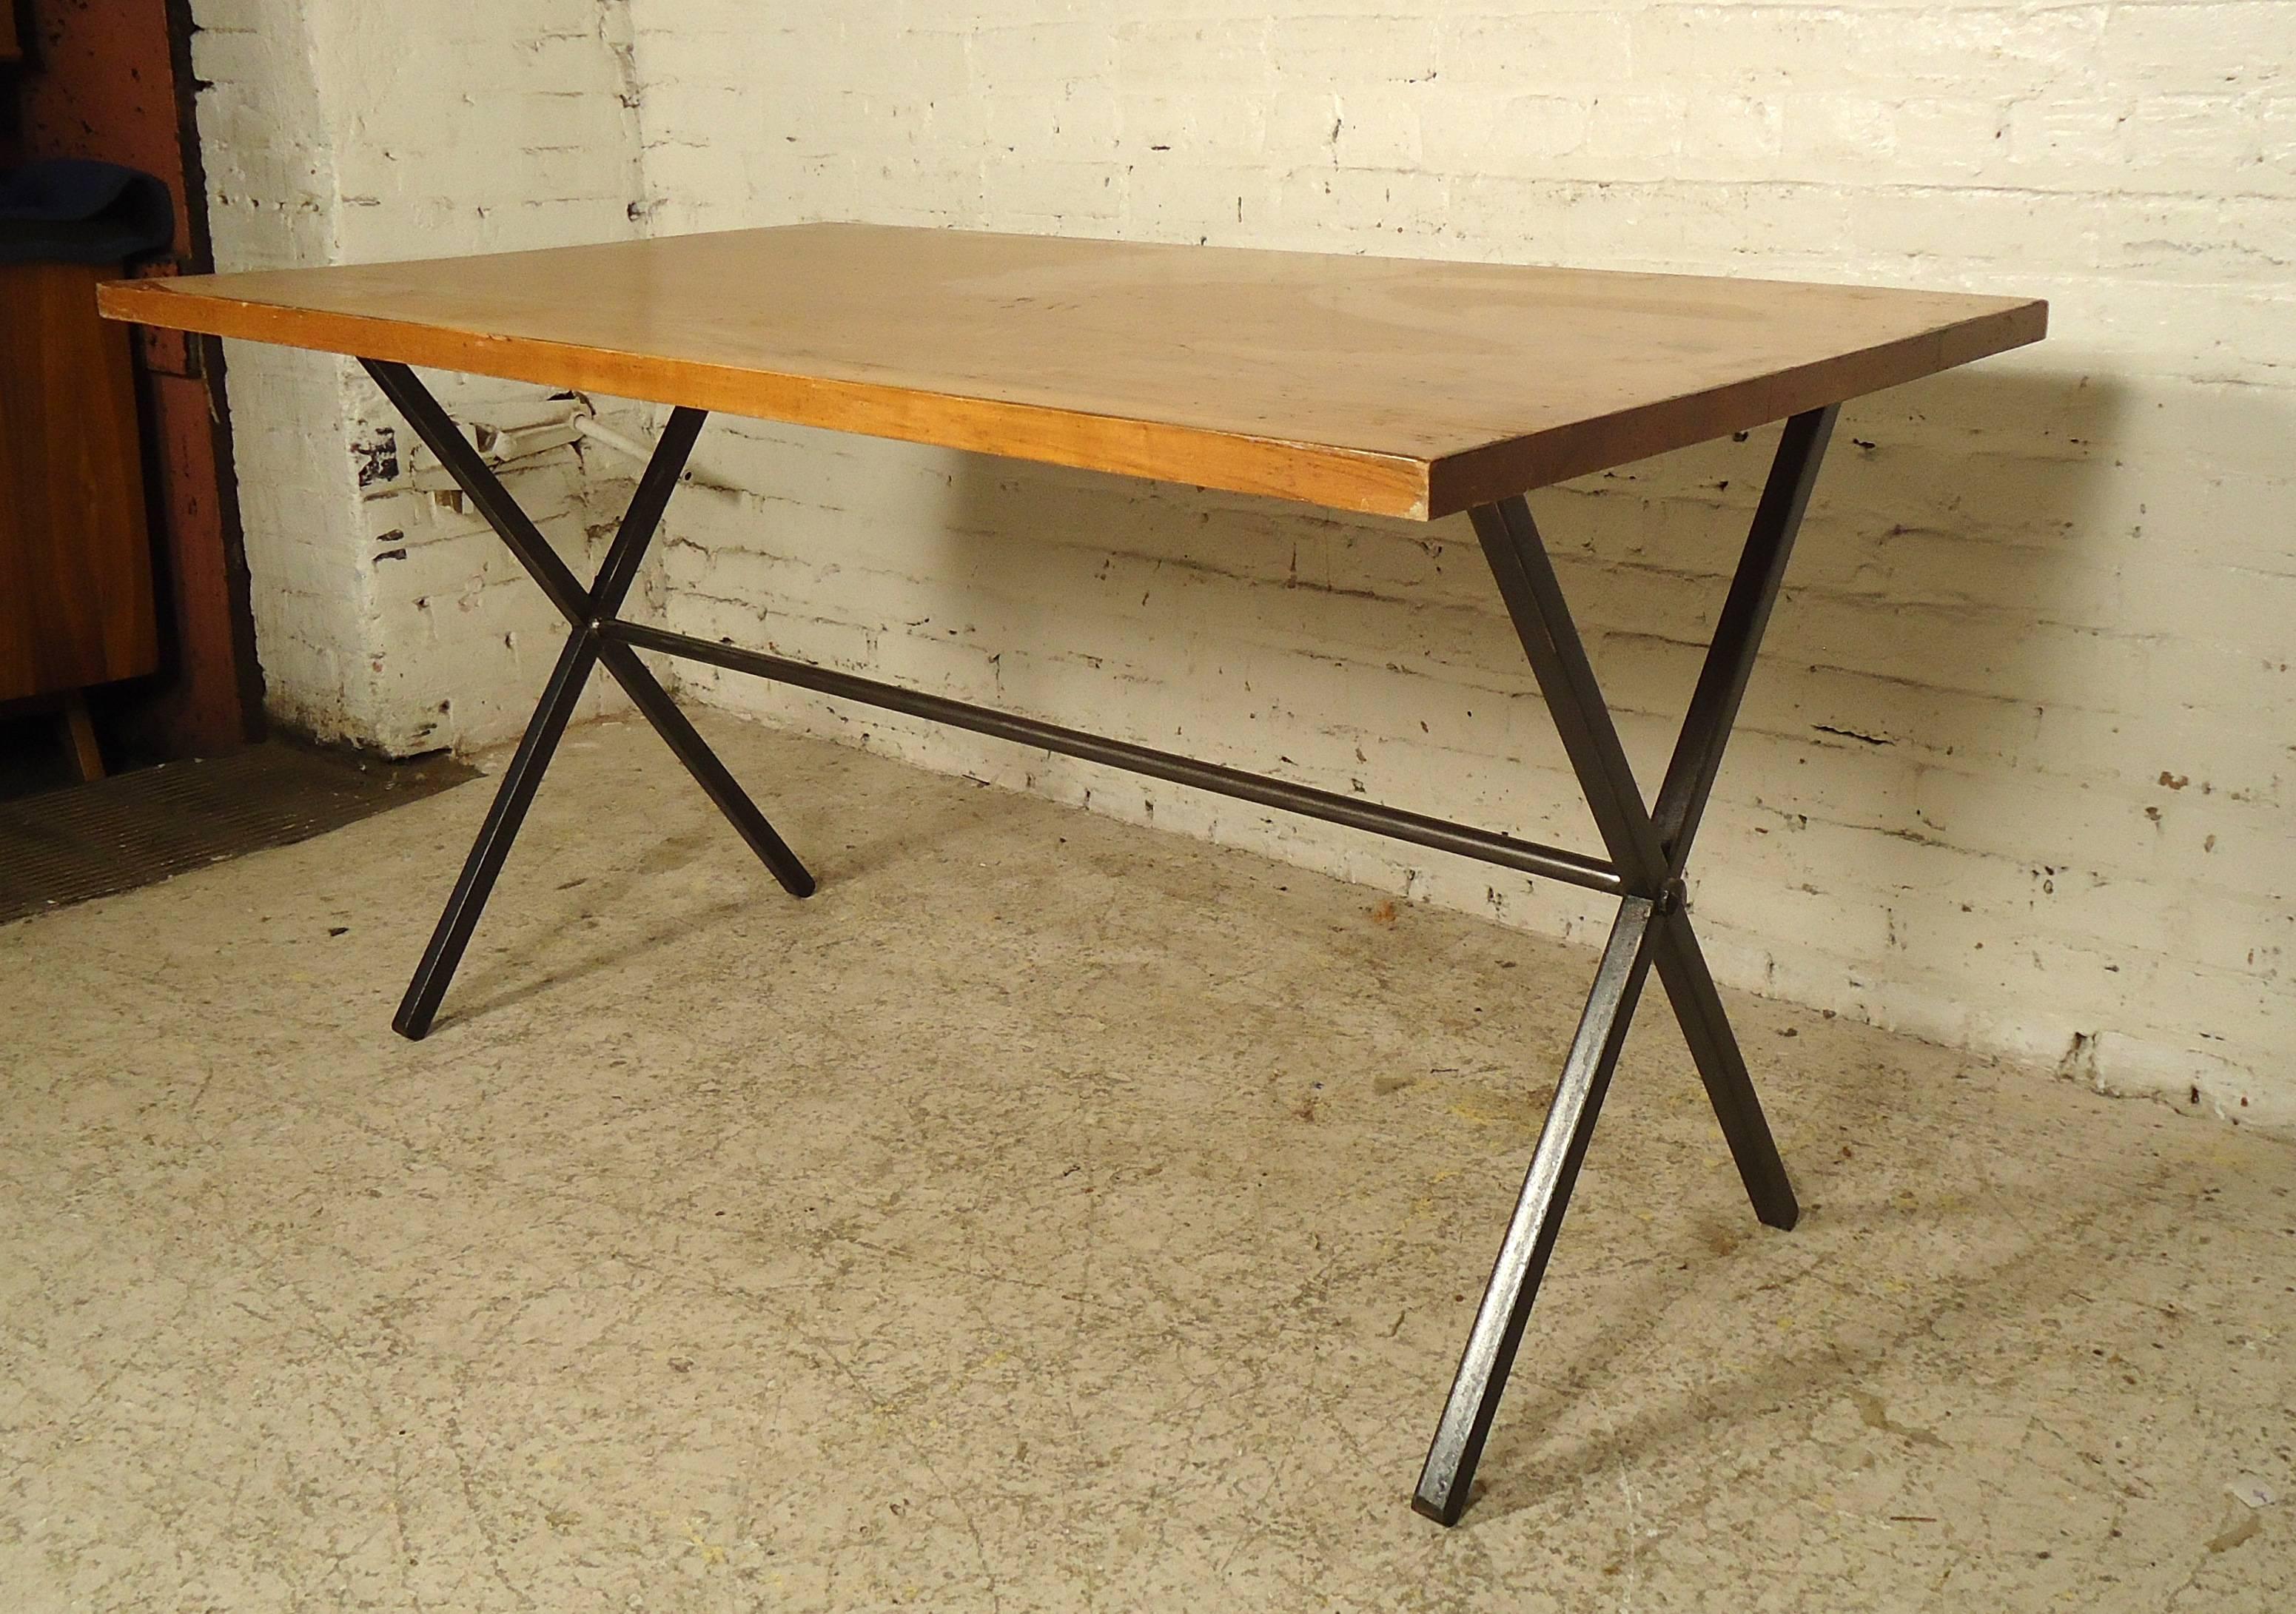 This unique table features a hardwood top, Iron base sturdily supports the large rectangular top it's been paired with.

Please confirm item location (NY or NJ).